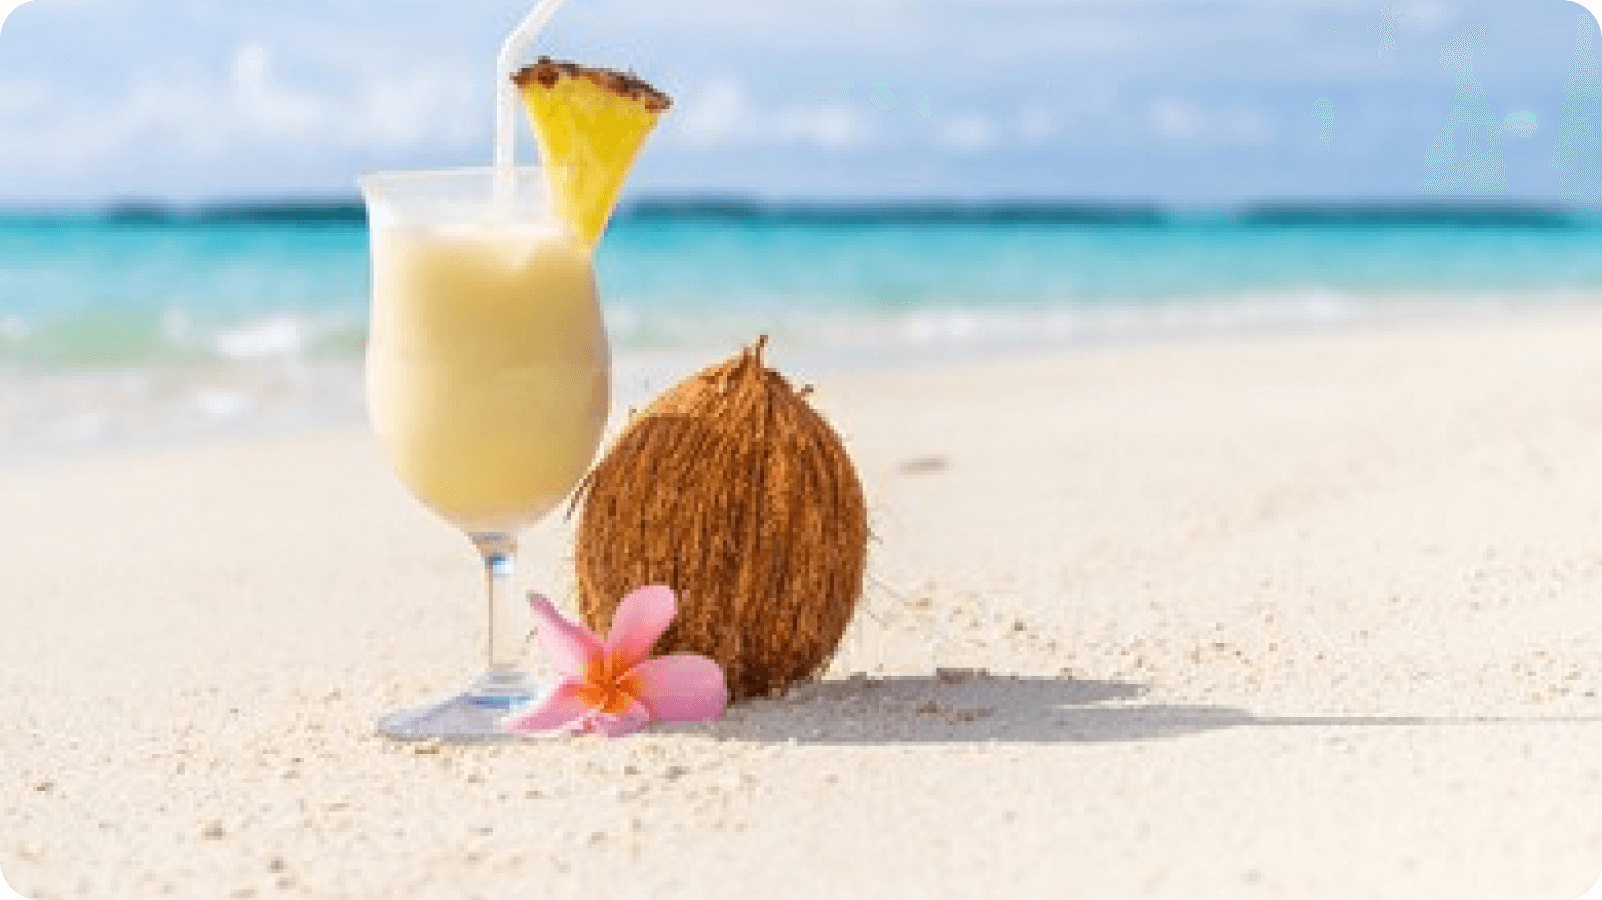 pina-colada-cocktail-on-beach-260nw-506813011 1